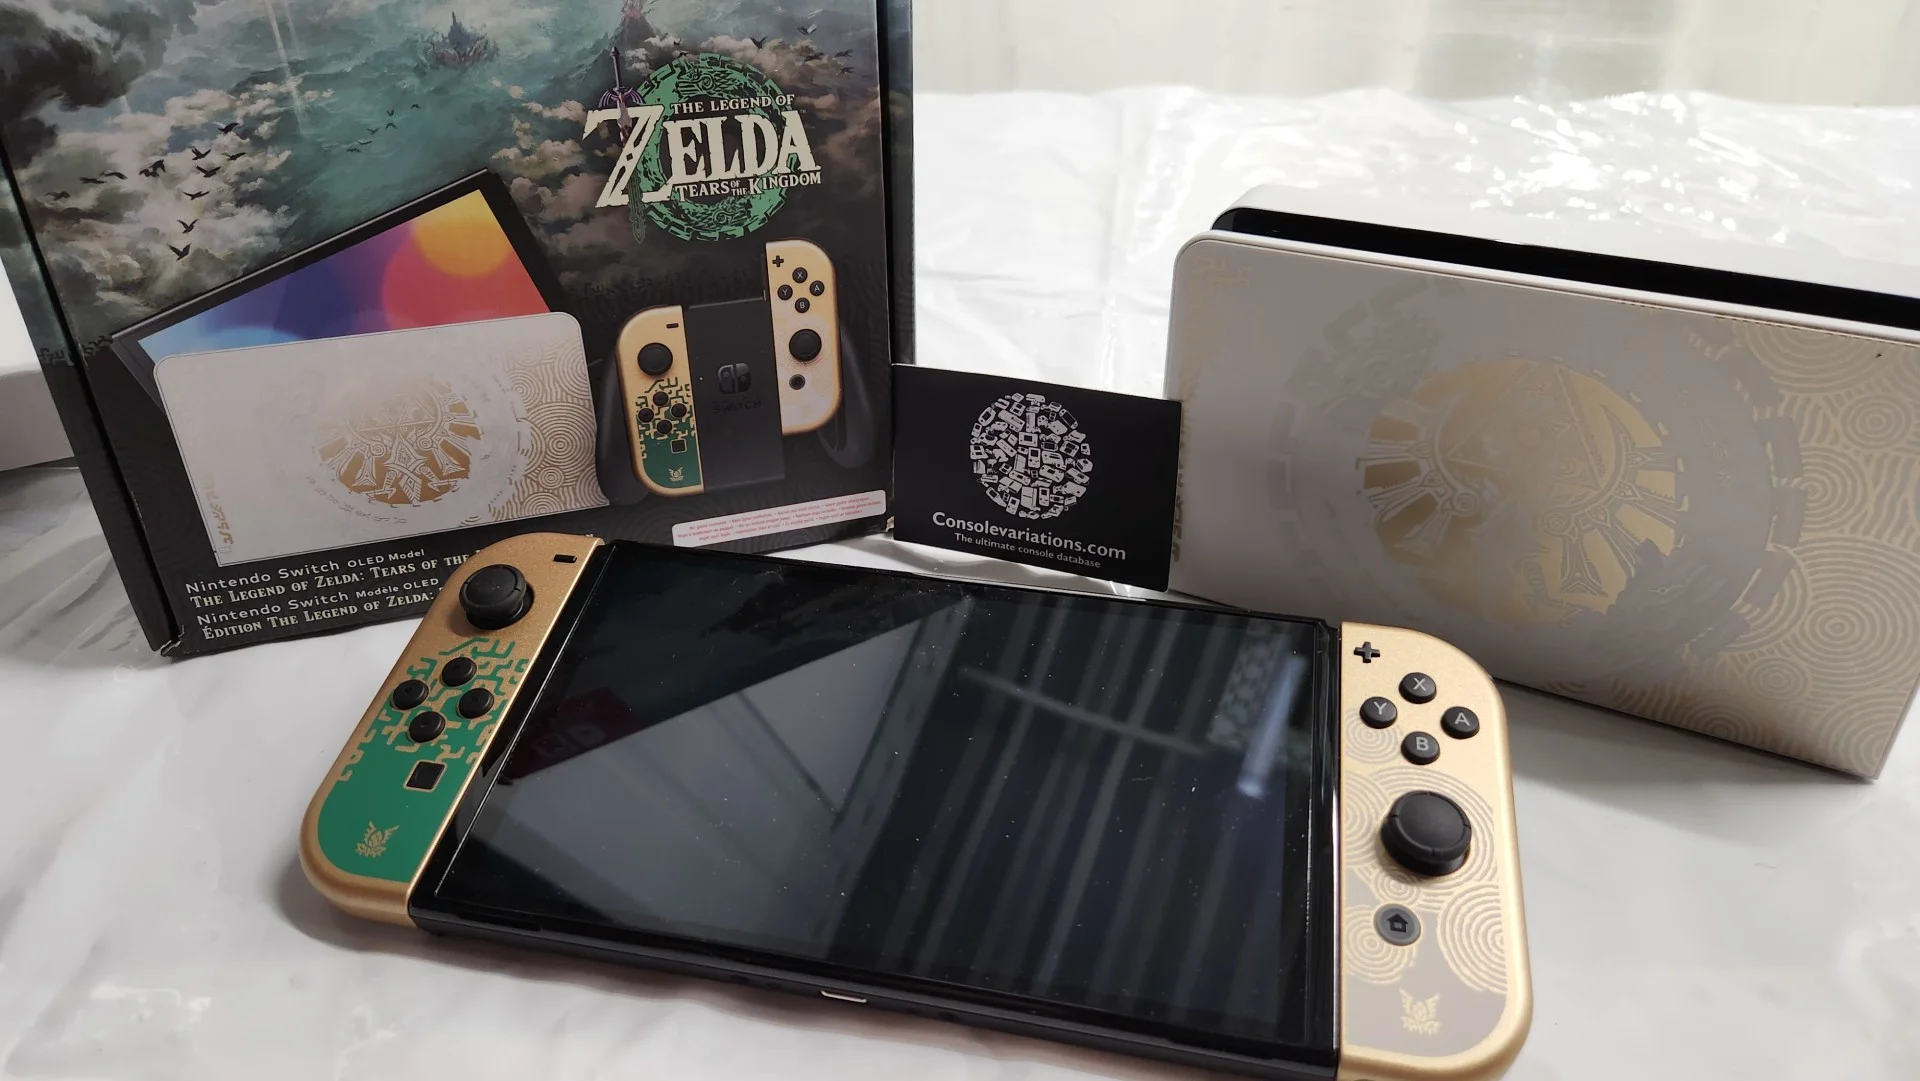 The Zelda OLED Switch is real! And we already had our hands on it!